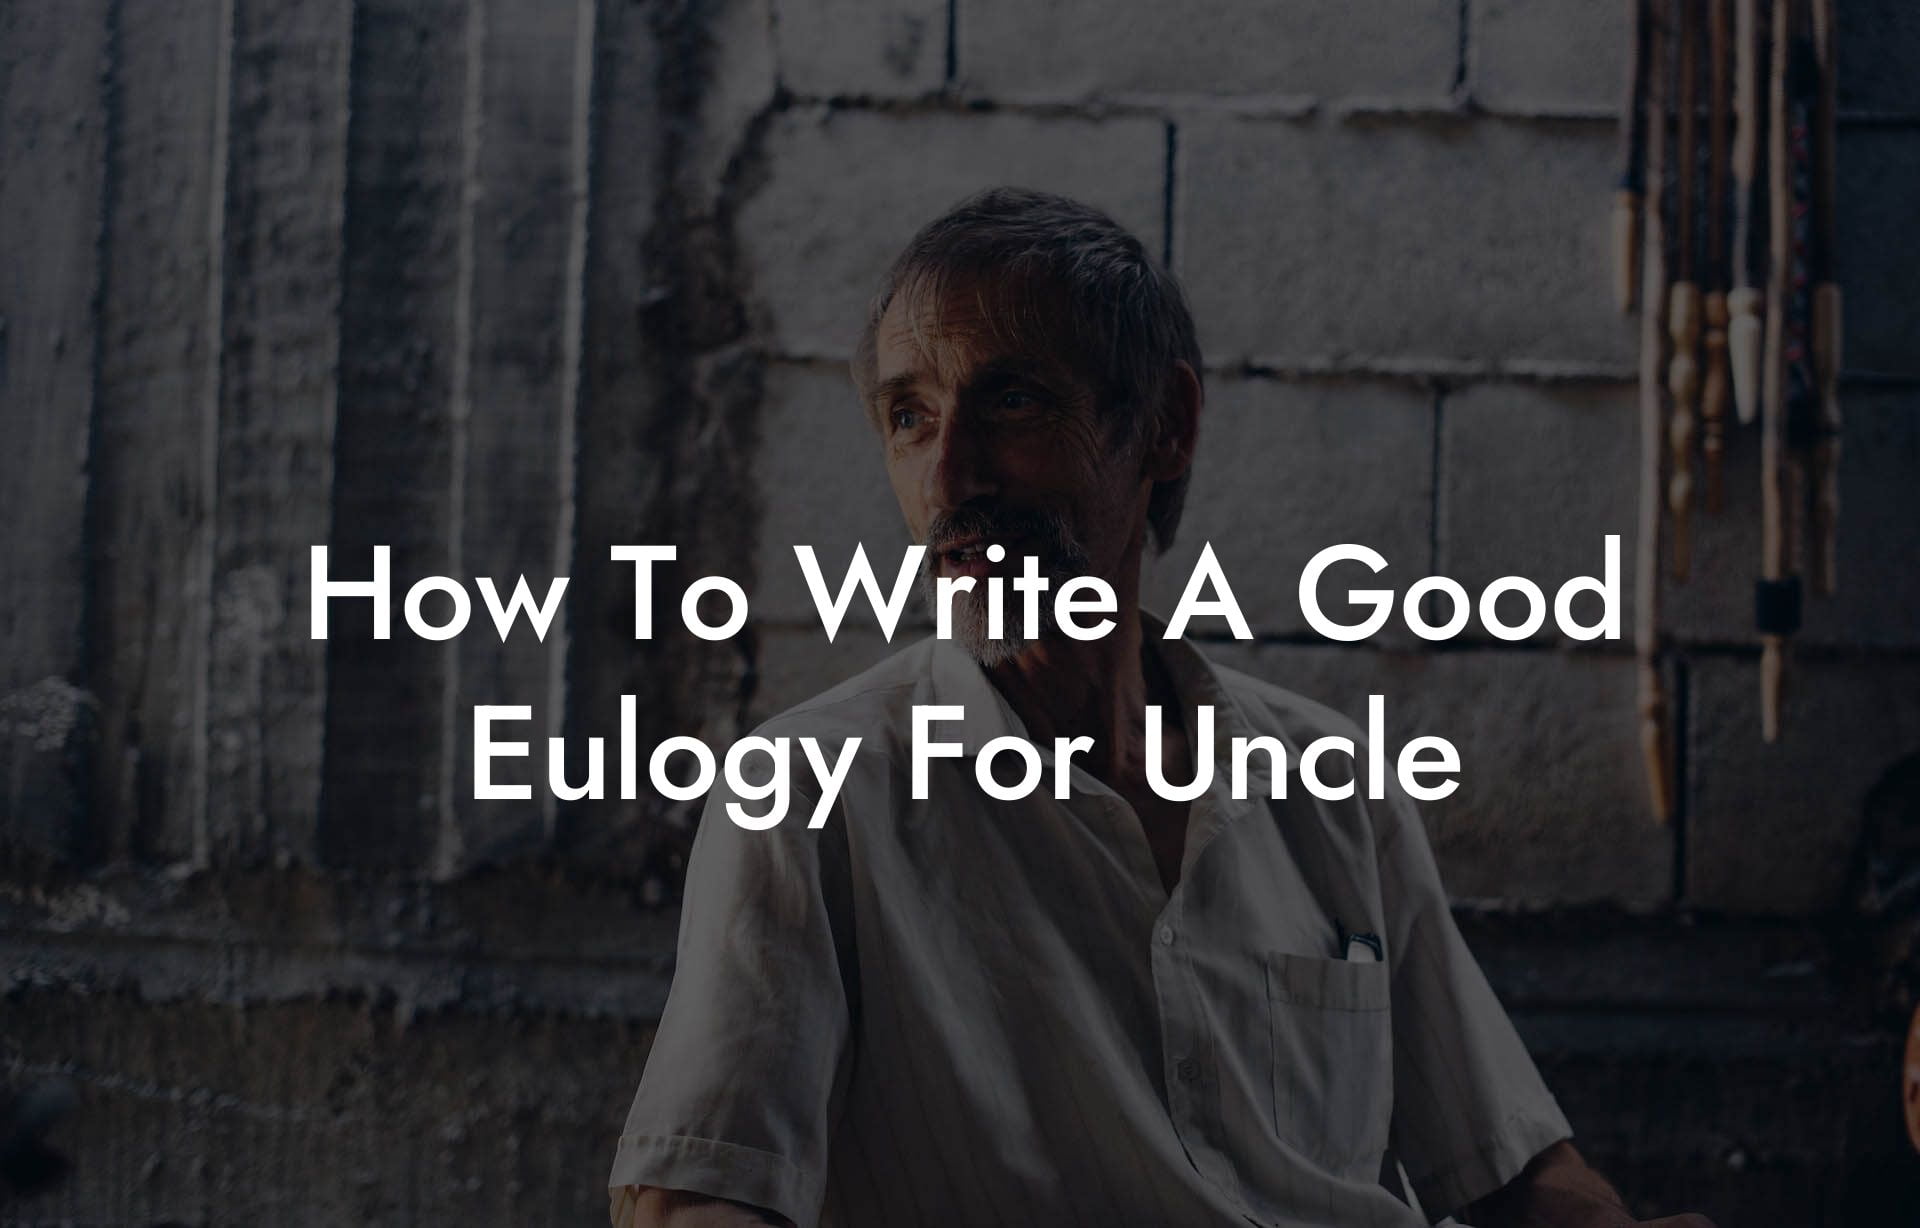 How To Write A Good Eulogy For Uncle